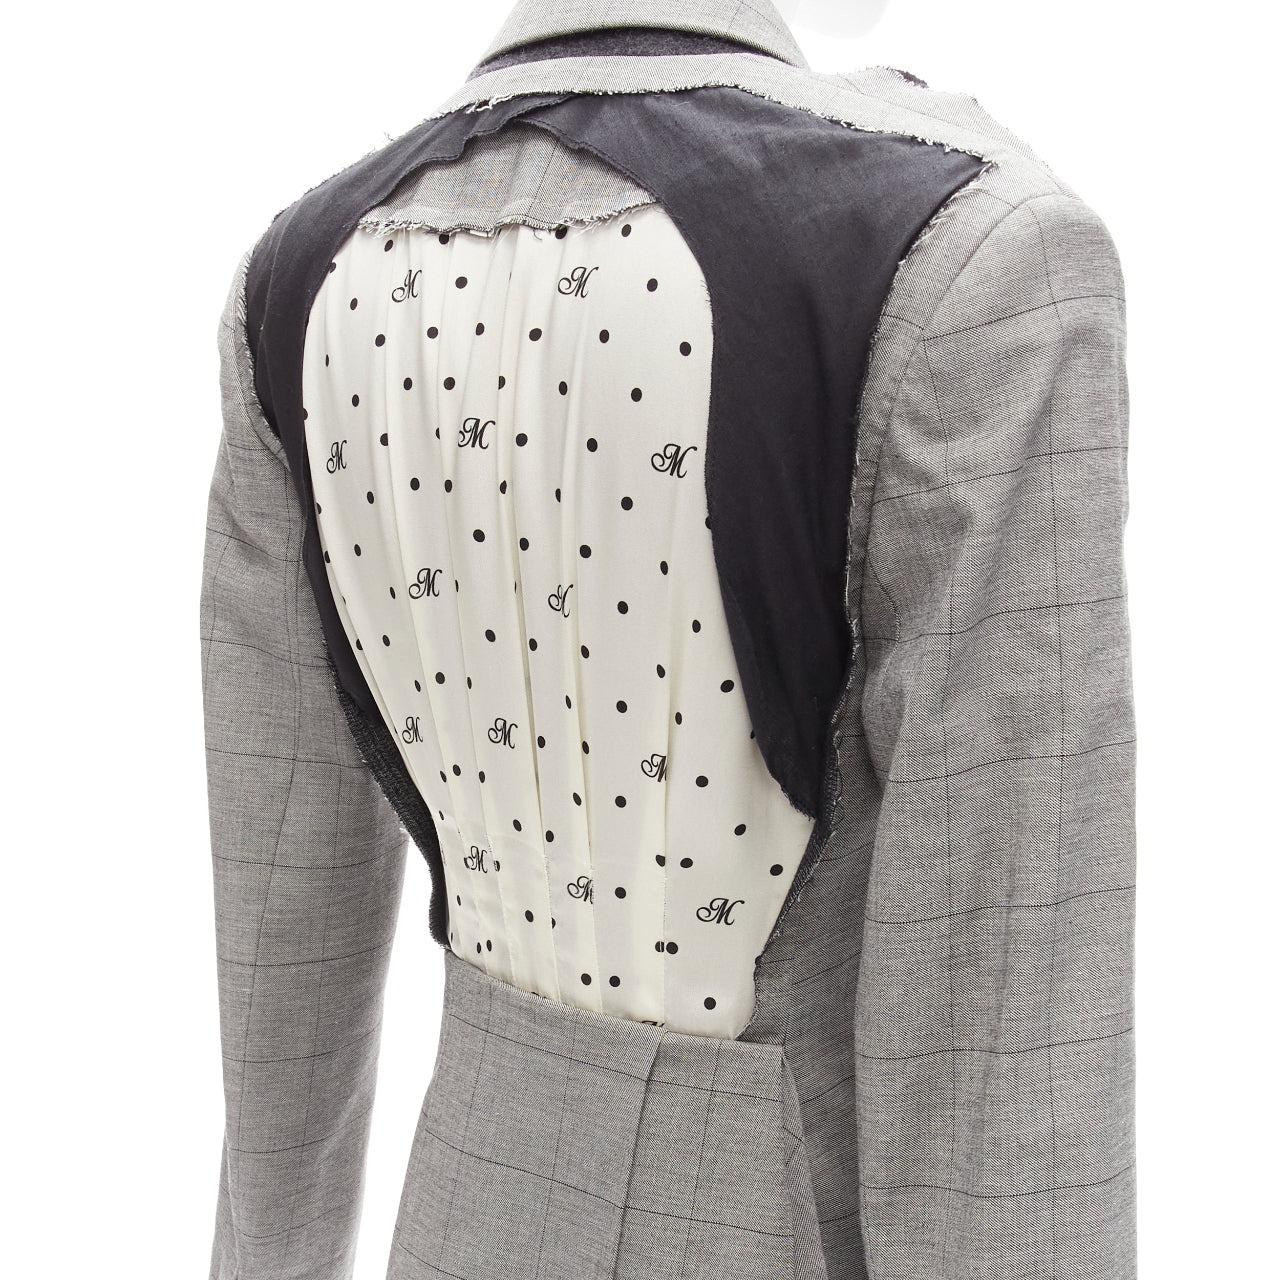 MONSE grey wool cotton deconstructed draped asymmetric blazer jacket US0 XS
Reference: NKLL/A00012
Brand: Monse
Material: Wool, Cotton, Blend
Color: Grey, Cream
Pattern: Plaid
Closure: Button
Lining: Black Fabric
Extra Details: Black/grey